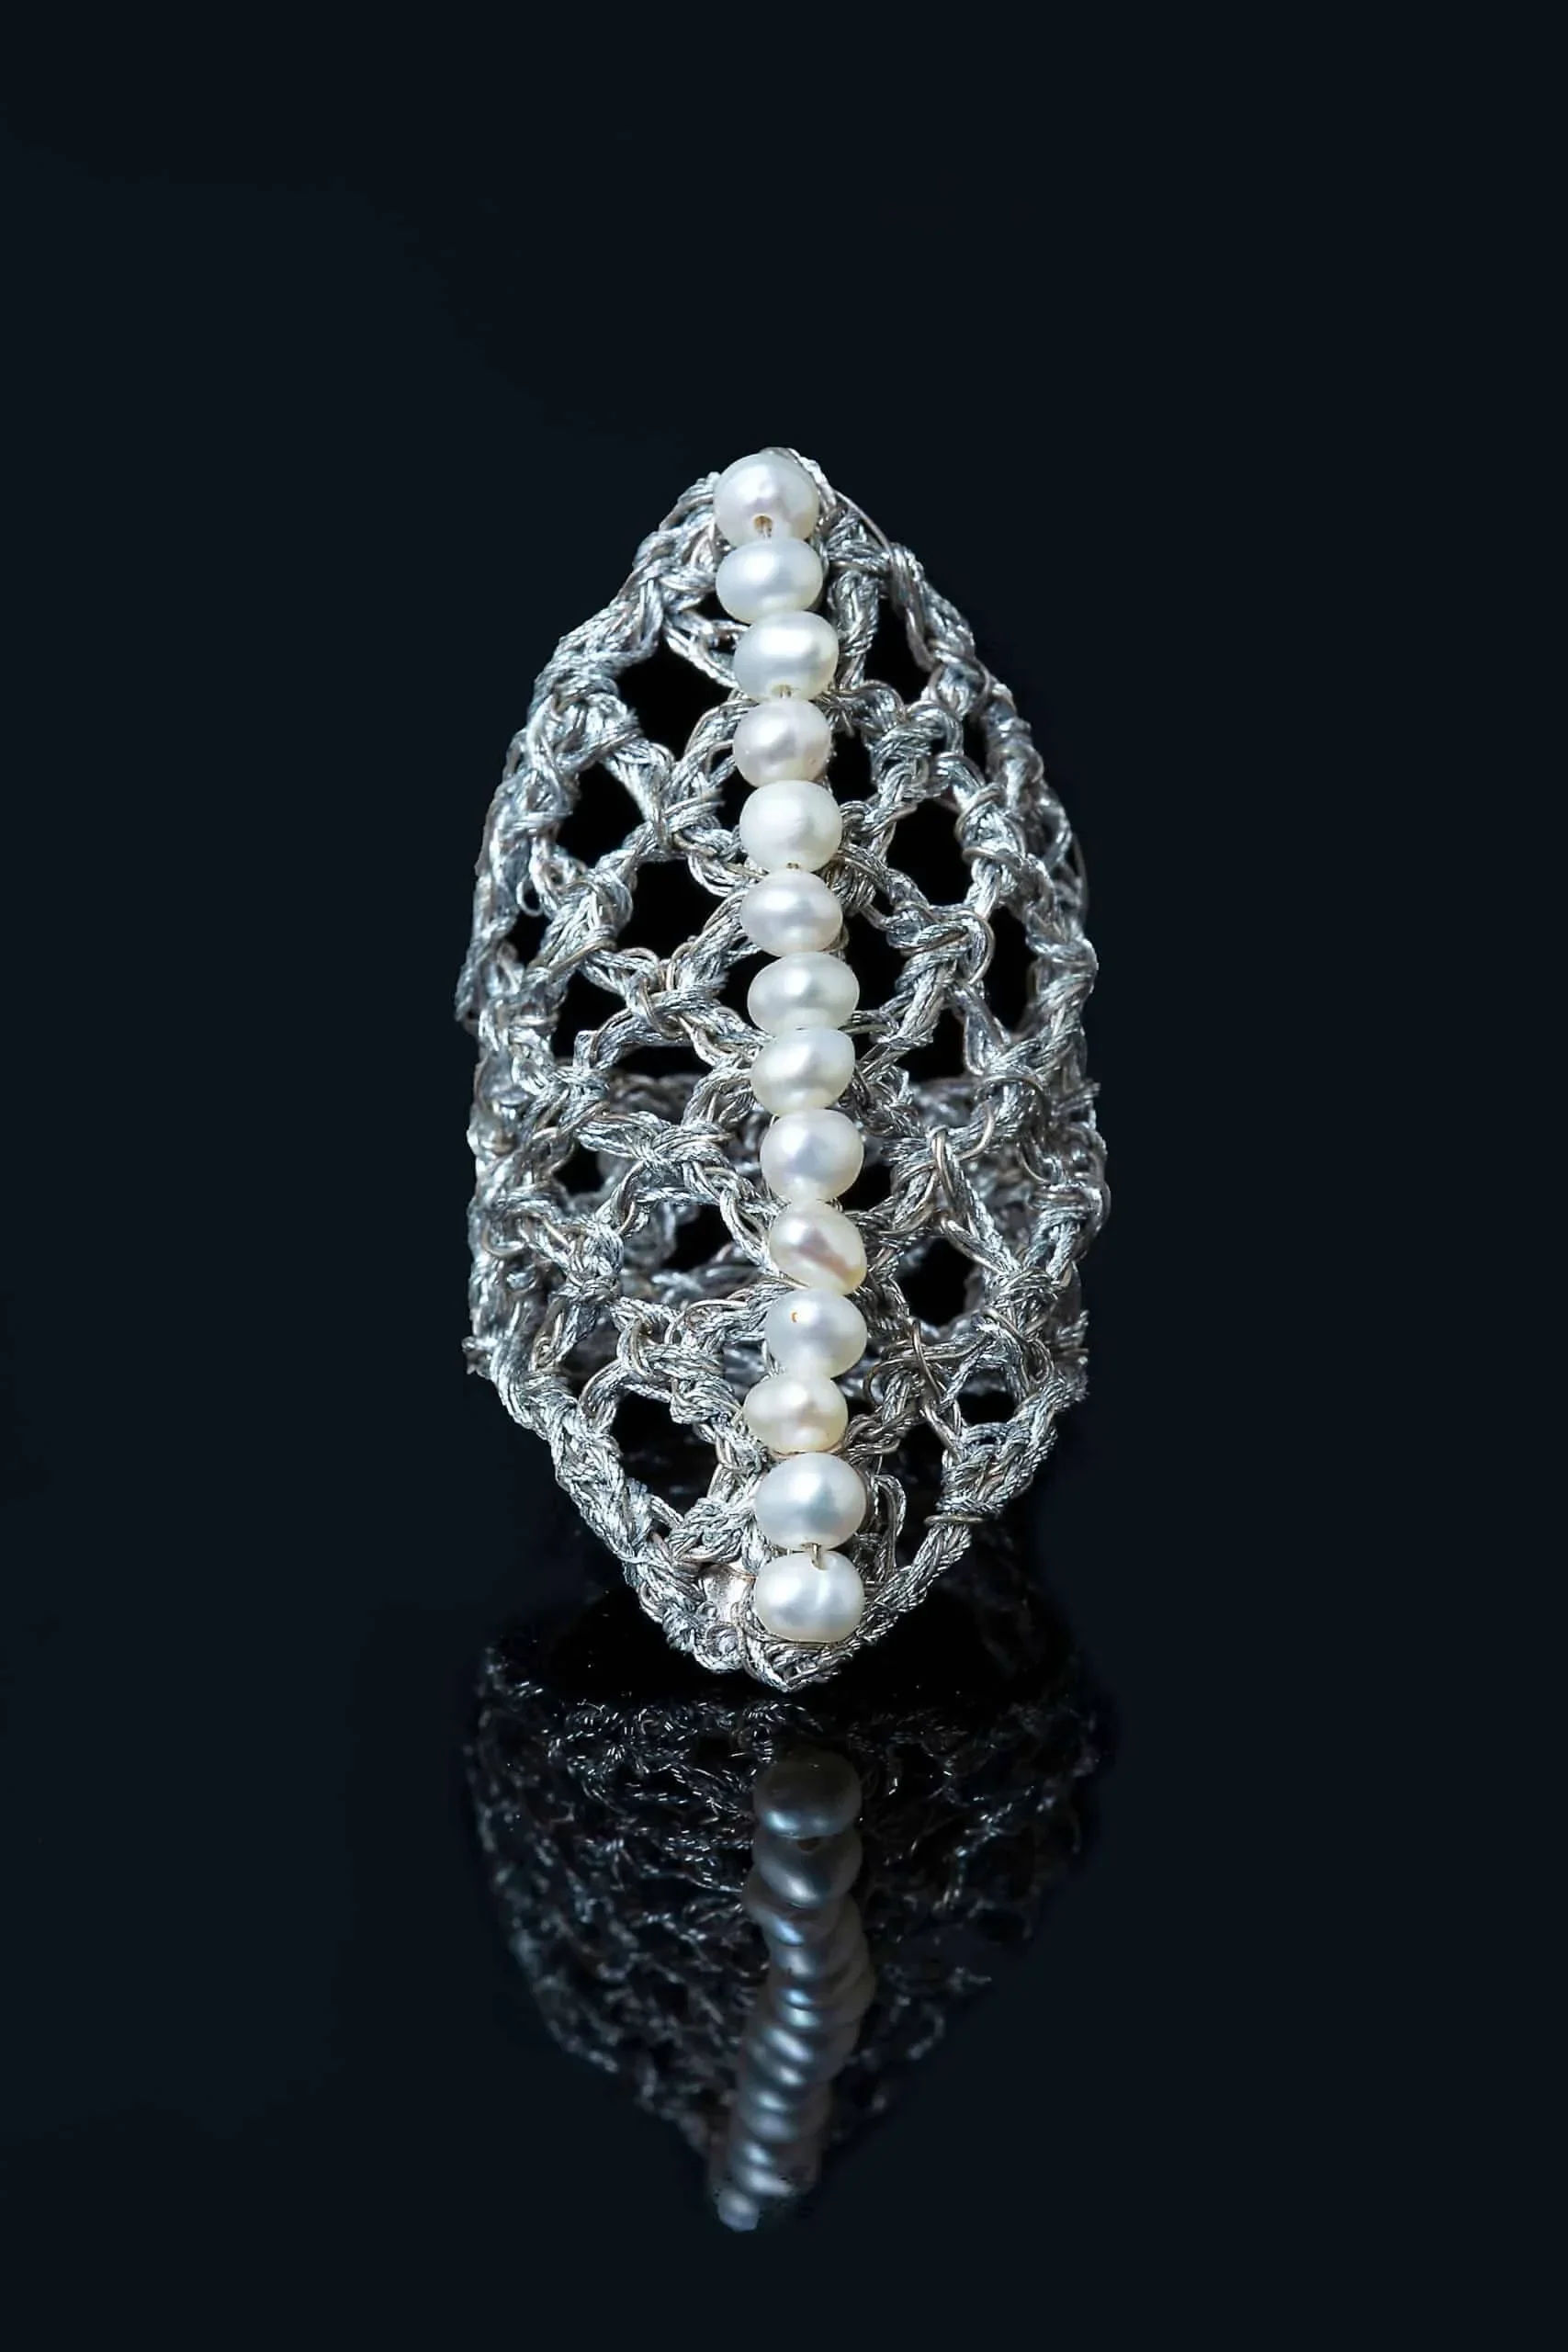 Handmade Jewellery | Crochet knit silver ring with pearls gallery 3